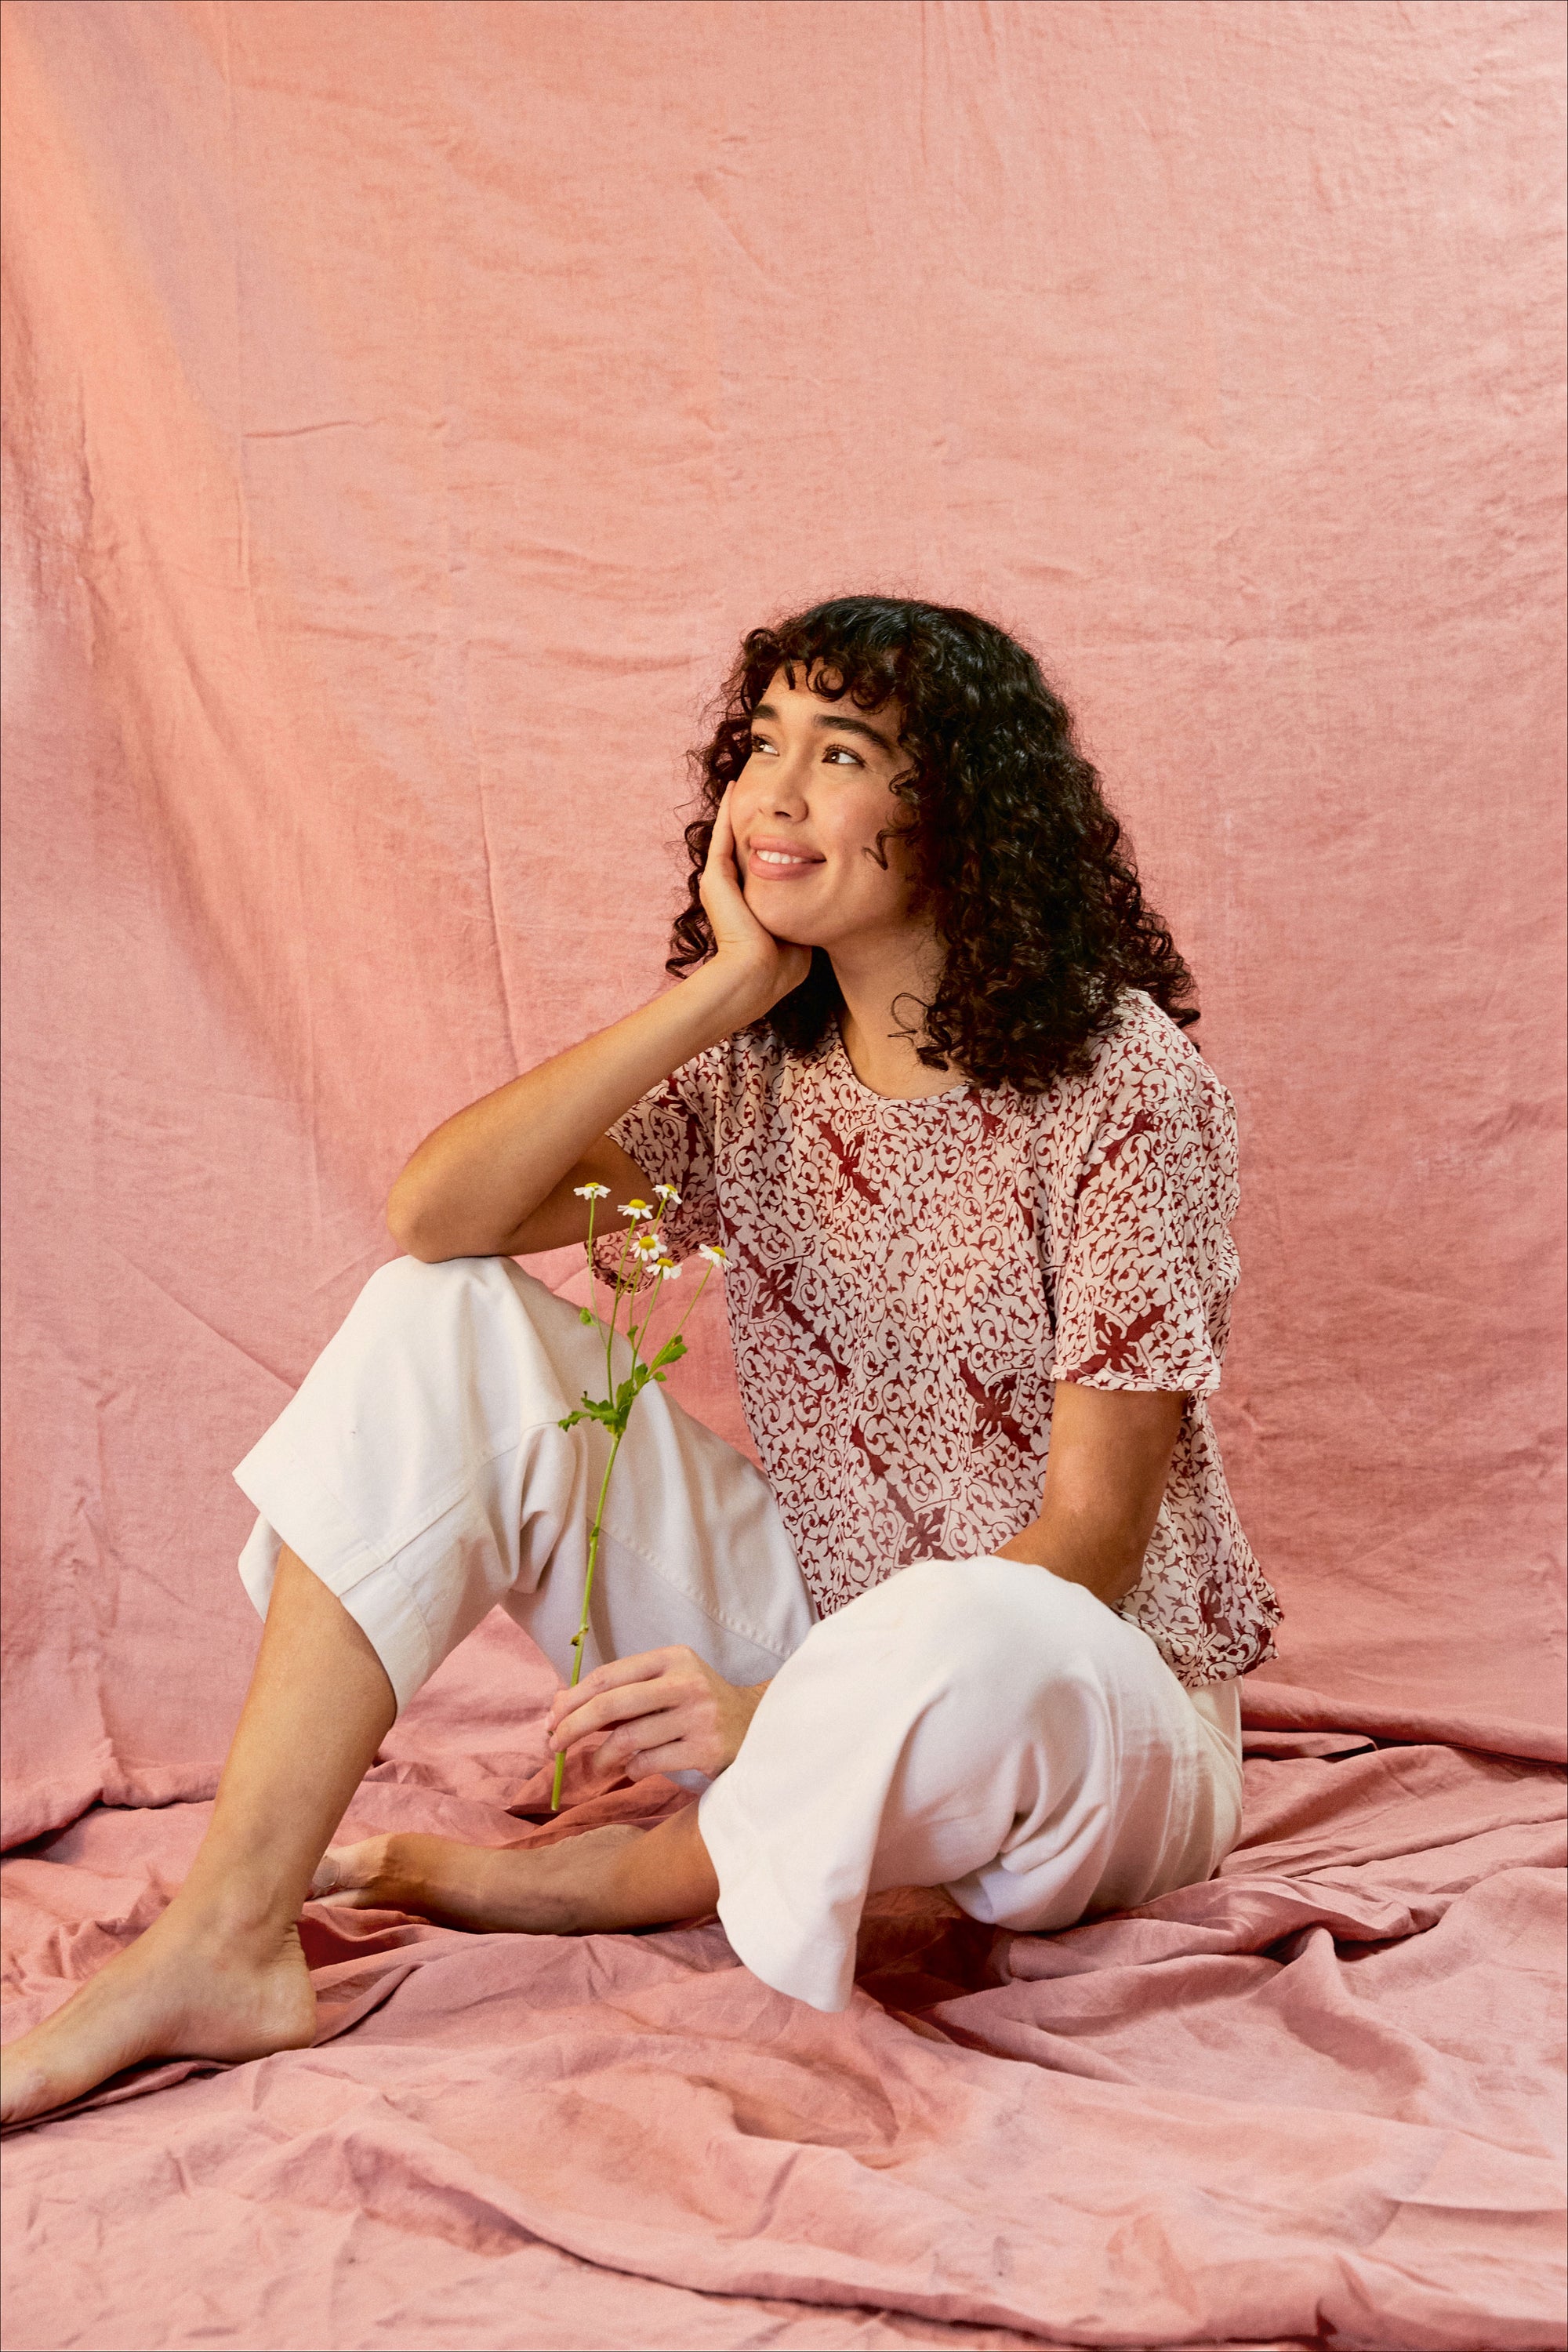 Model wearing the Alicia Top with white pants, against a pink backdrop. Model is holding a flower and sitting down.